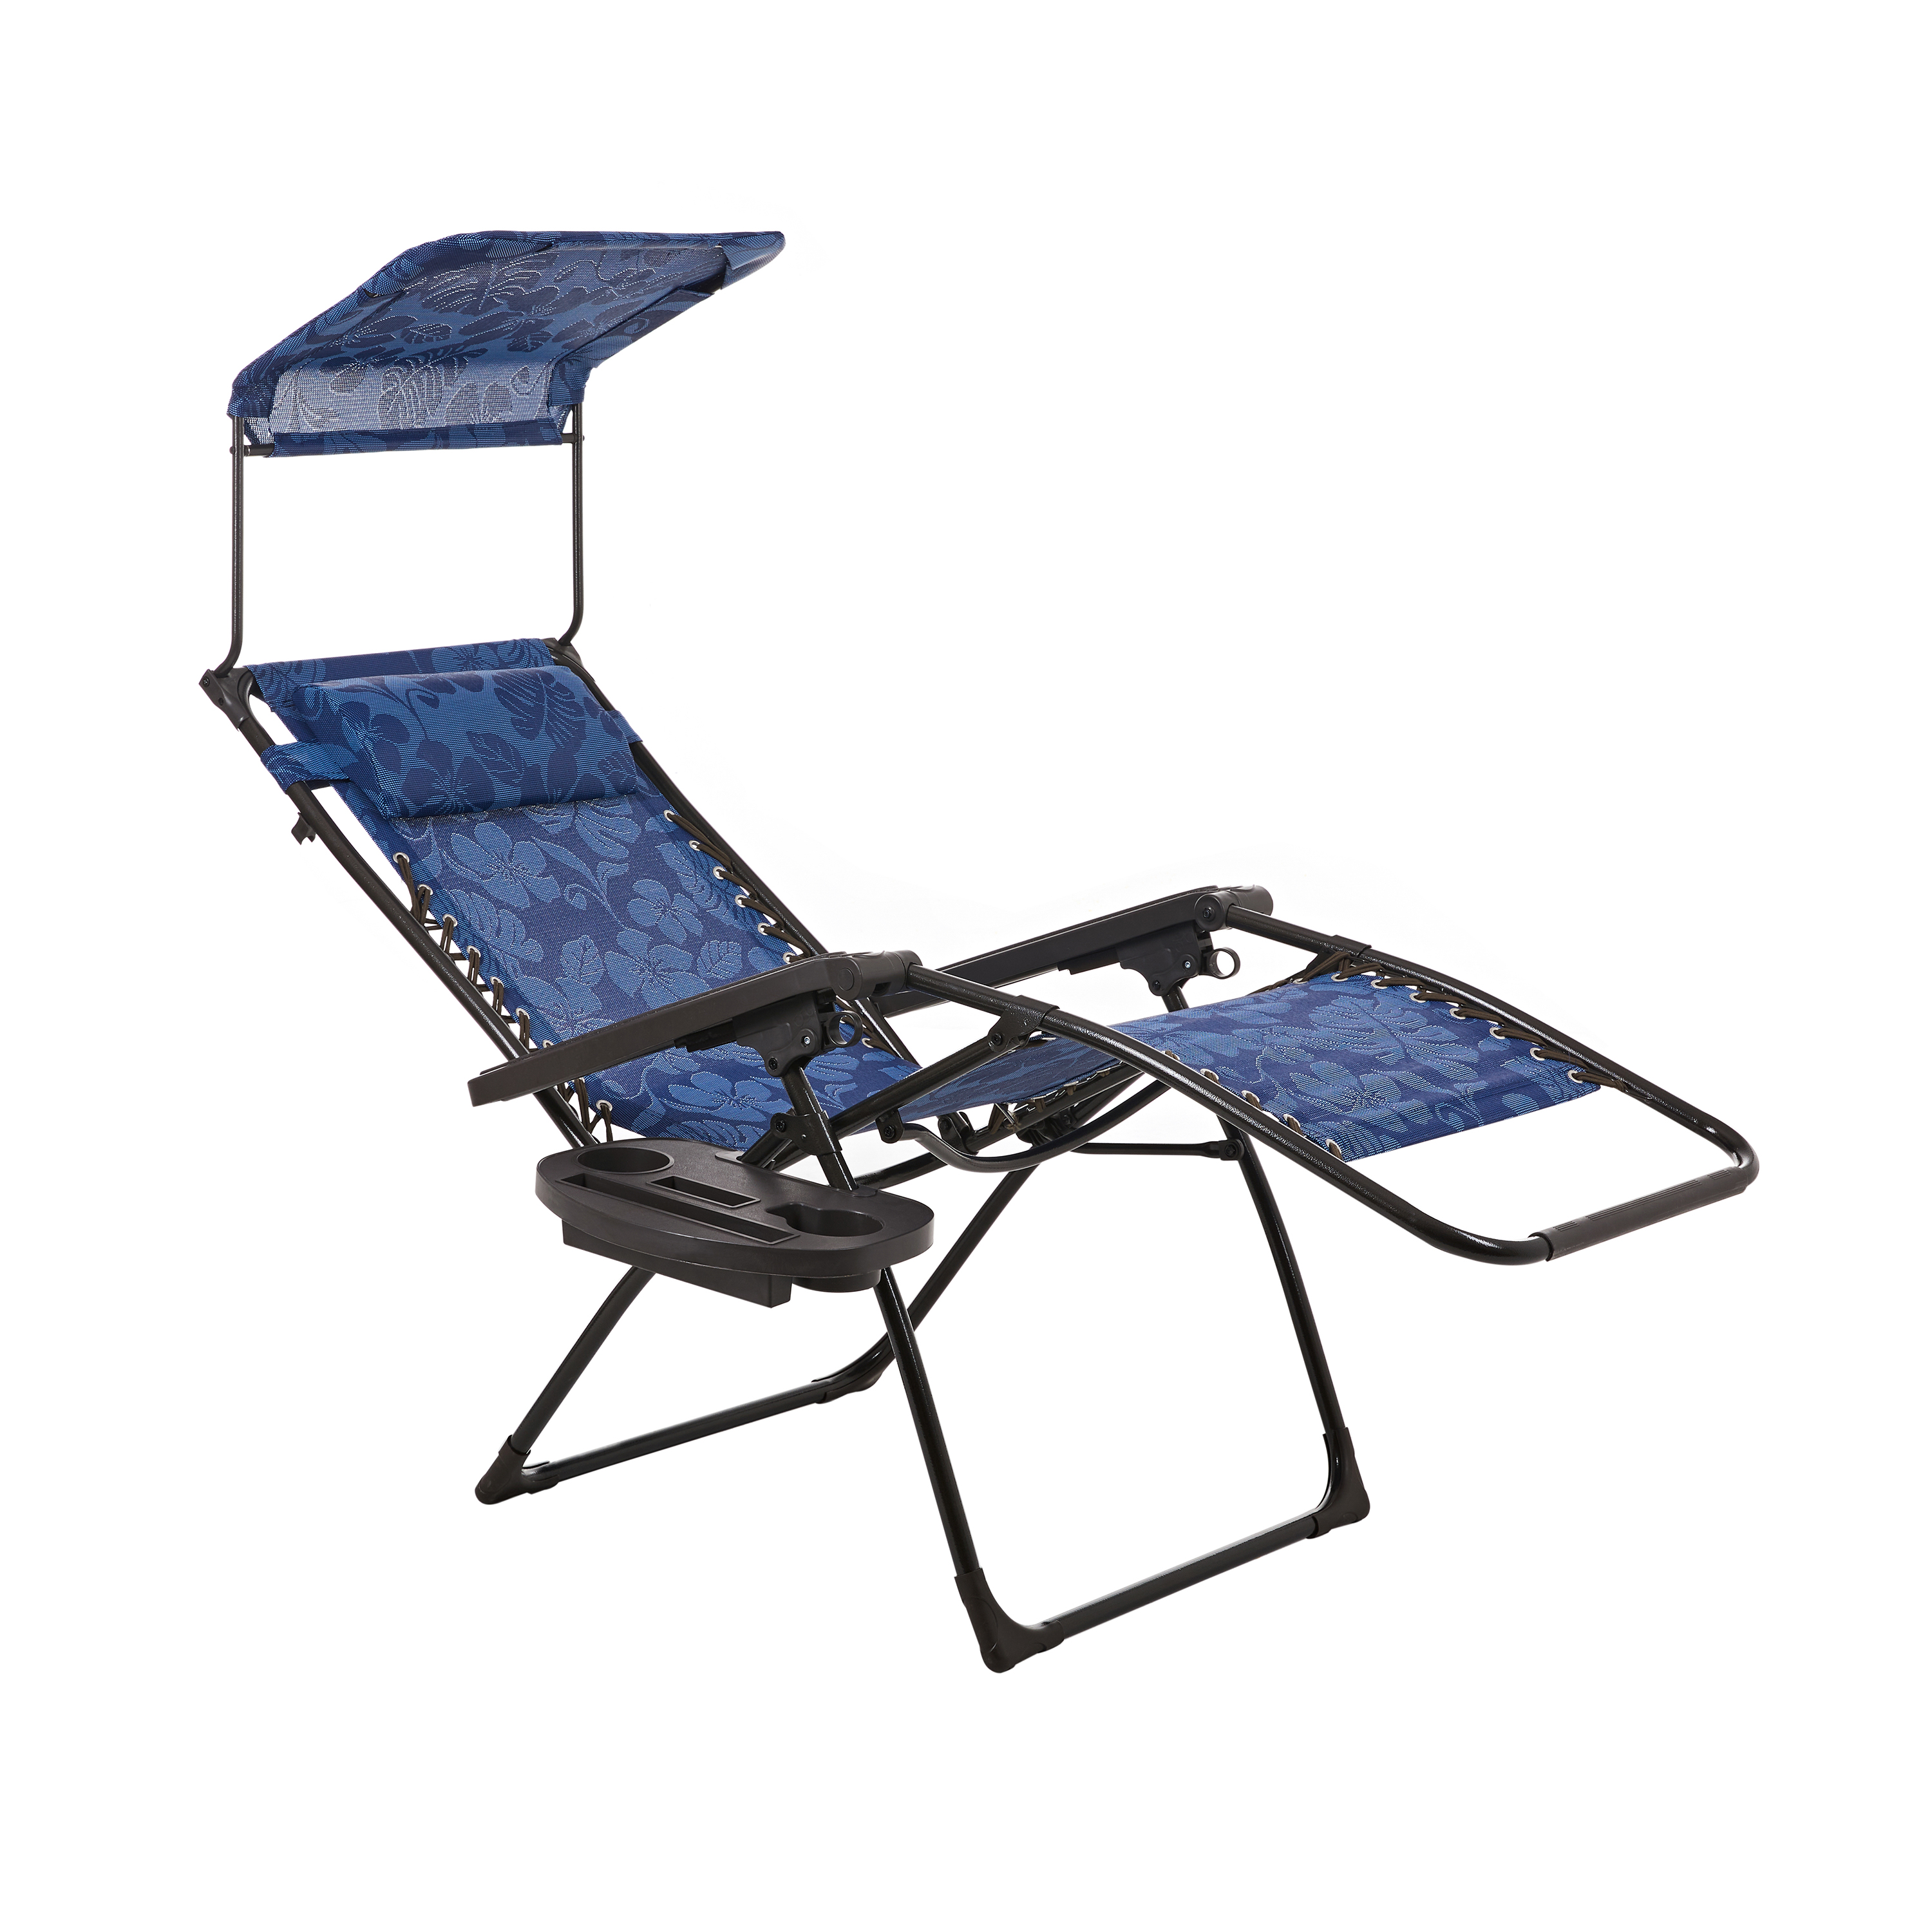 Bliss Hammocks Blue Flower 26" Wide Zero Gravity Chair w/ Adjustable Canopy, Drink Tray & Pillow, 300 Lb. Capacity - image 4 of 13